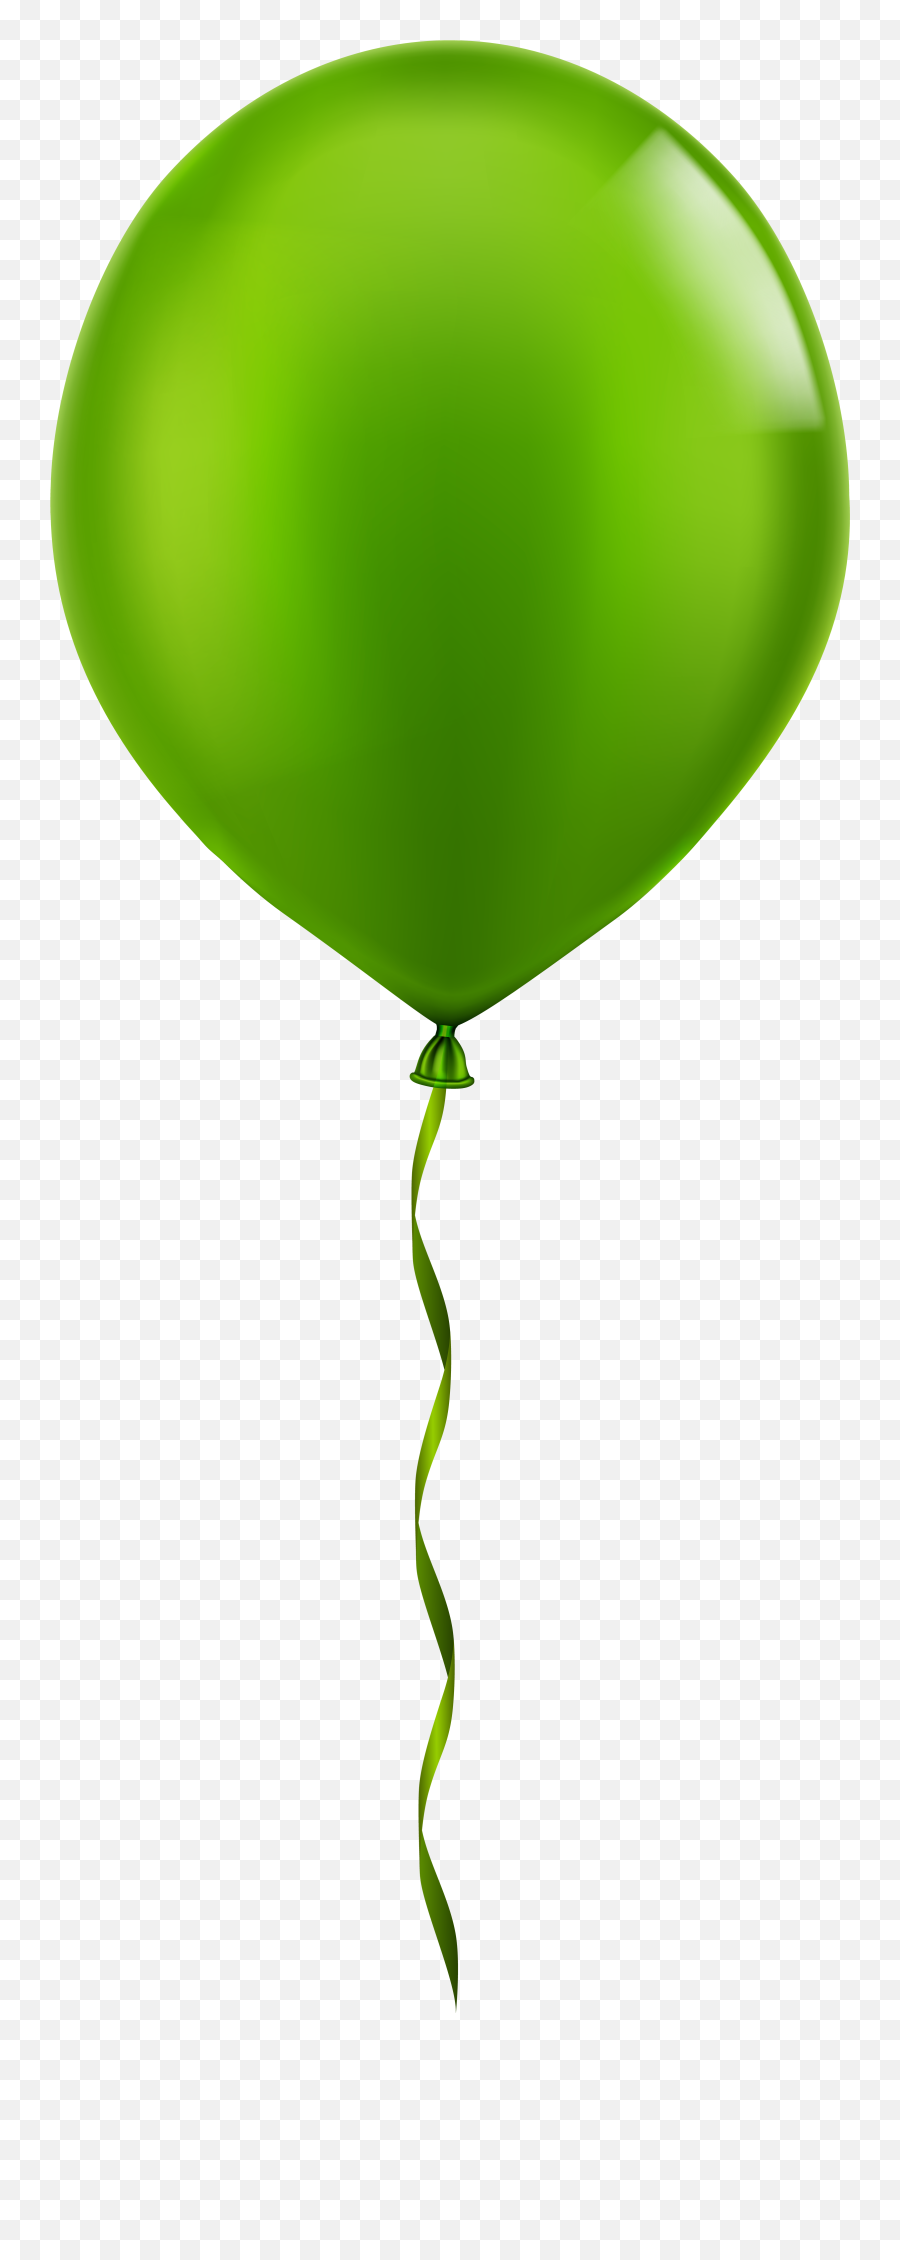 Party Ballons Png - Png Free Download Single Balloon Png Green Balloon Png,Ballons Png